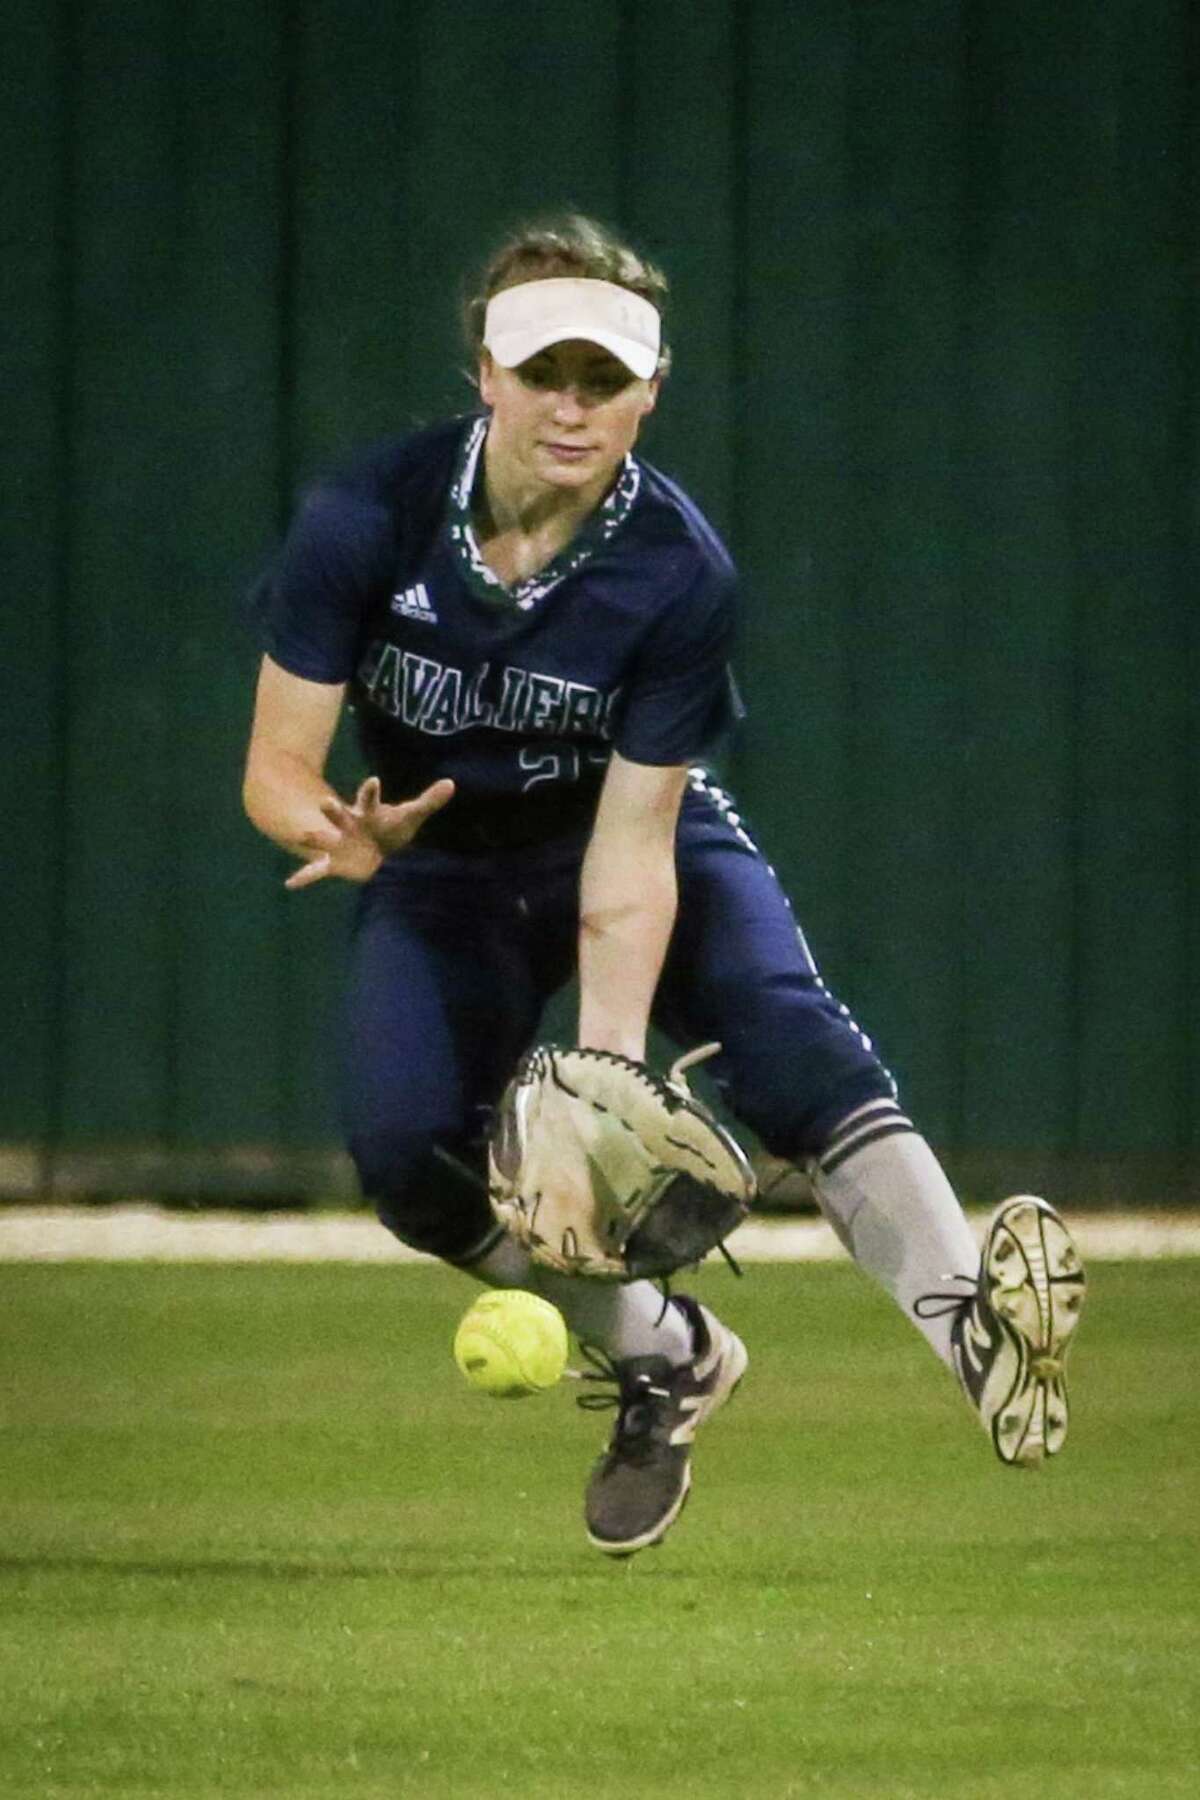 College Park softball hoping to take next step in Jeremy Collins